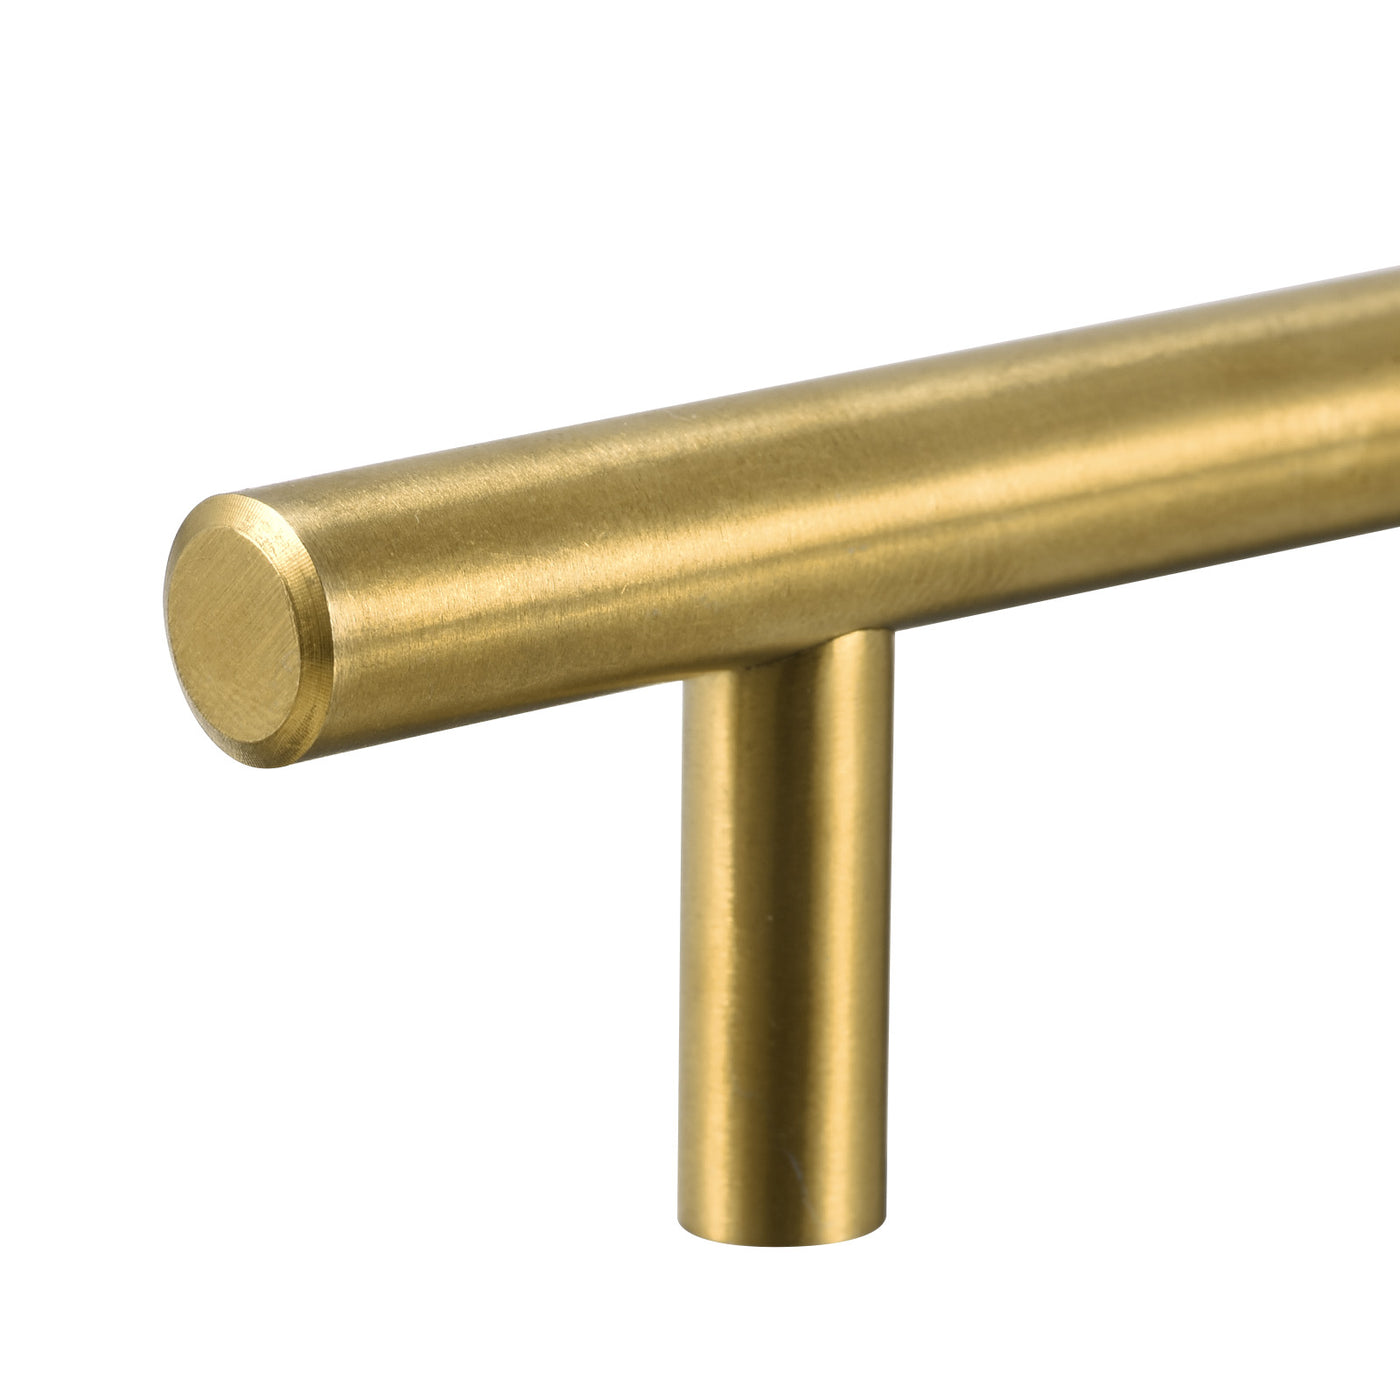 uxcell Uxcell T Bar Pull Handle, 10"(250mm) Length 12mm Dia Stainless Steel Cabinet Pulls 6.3"(160mm) Hole Center Distance Gold Tone 2pcs